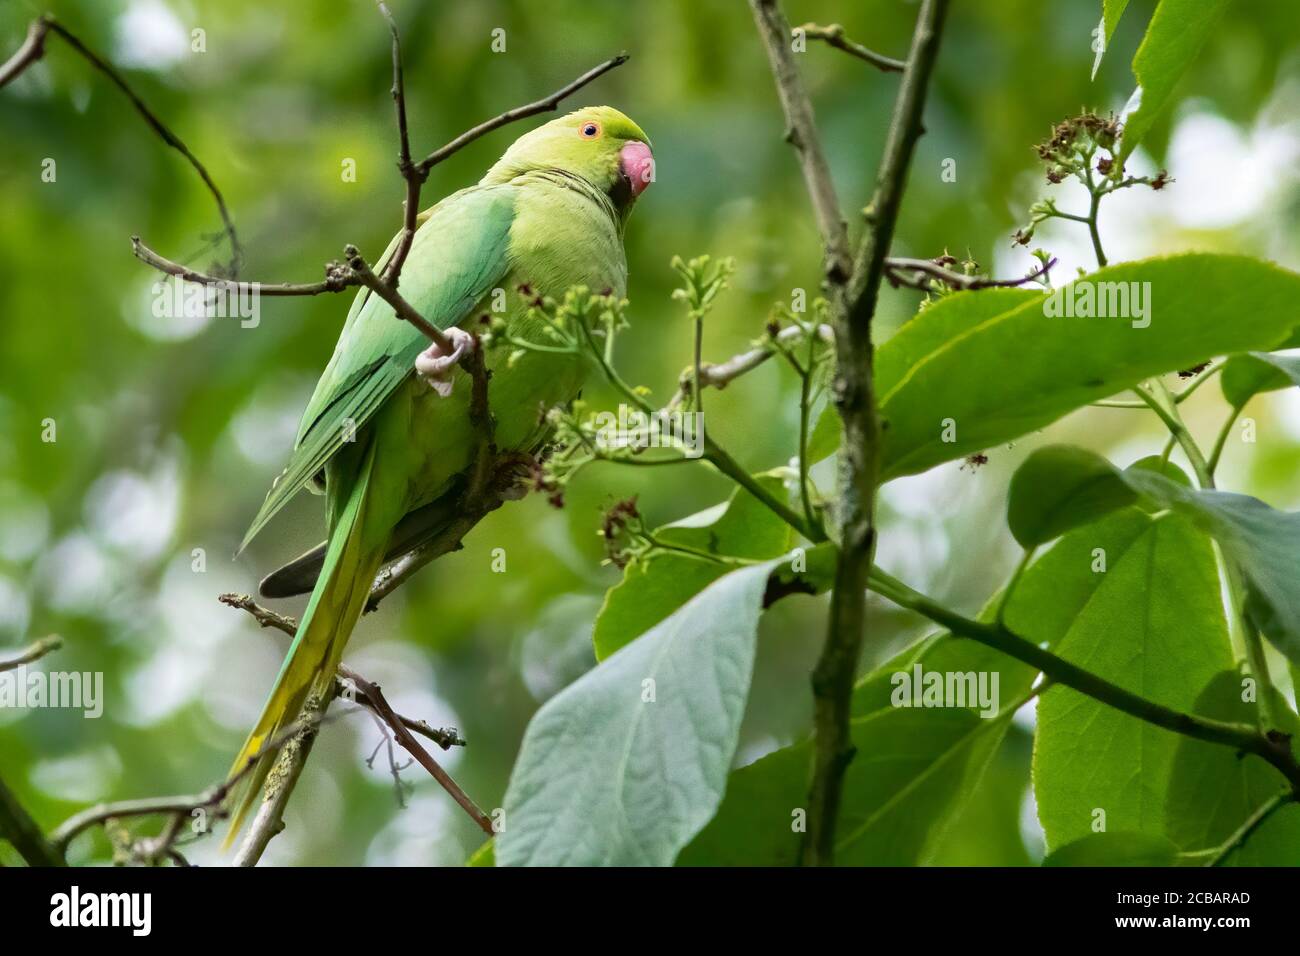 beautiful wild green parakeet bird on tree branch and green leaves Stock Photo